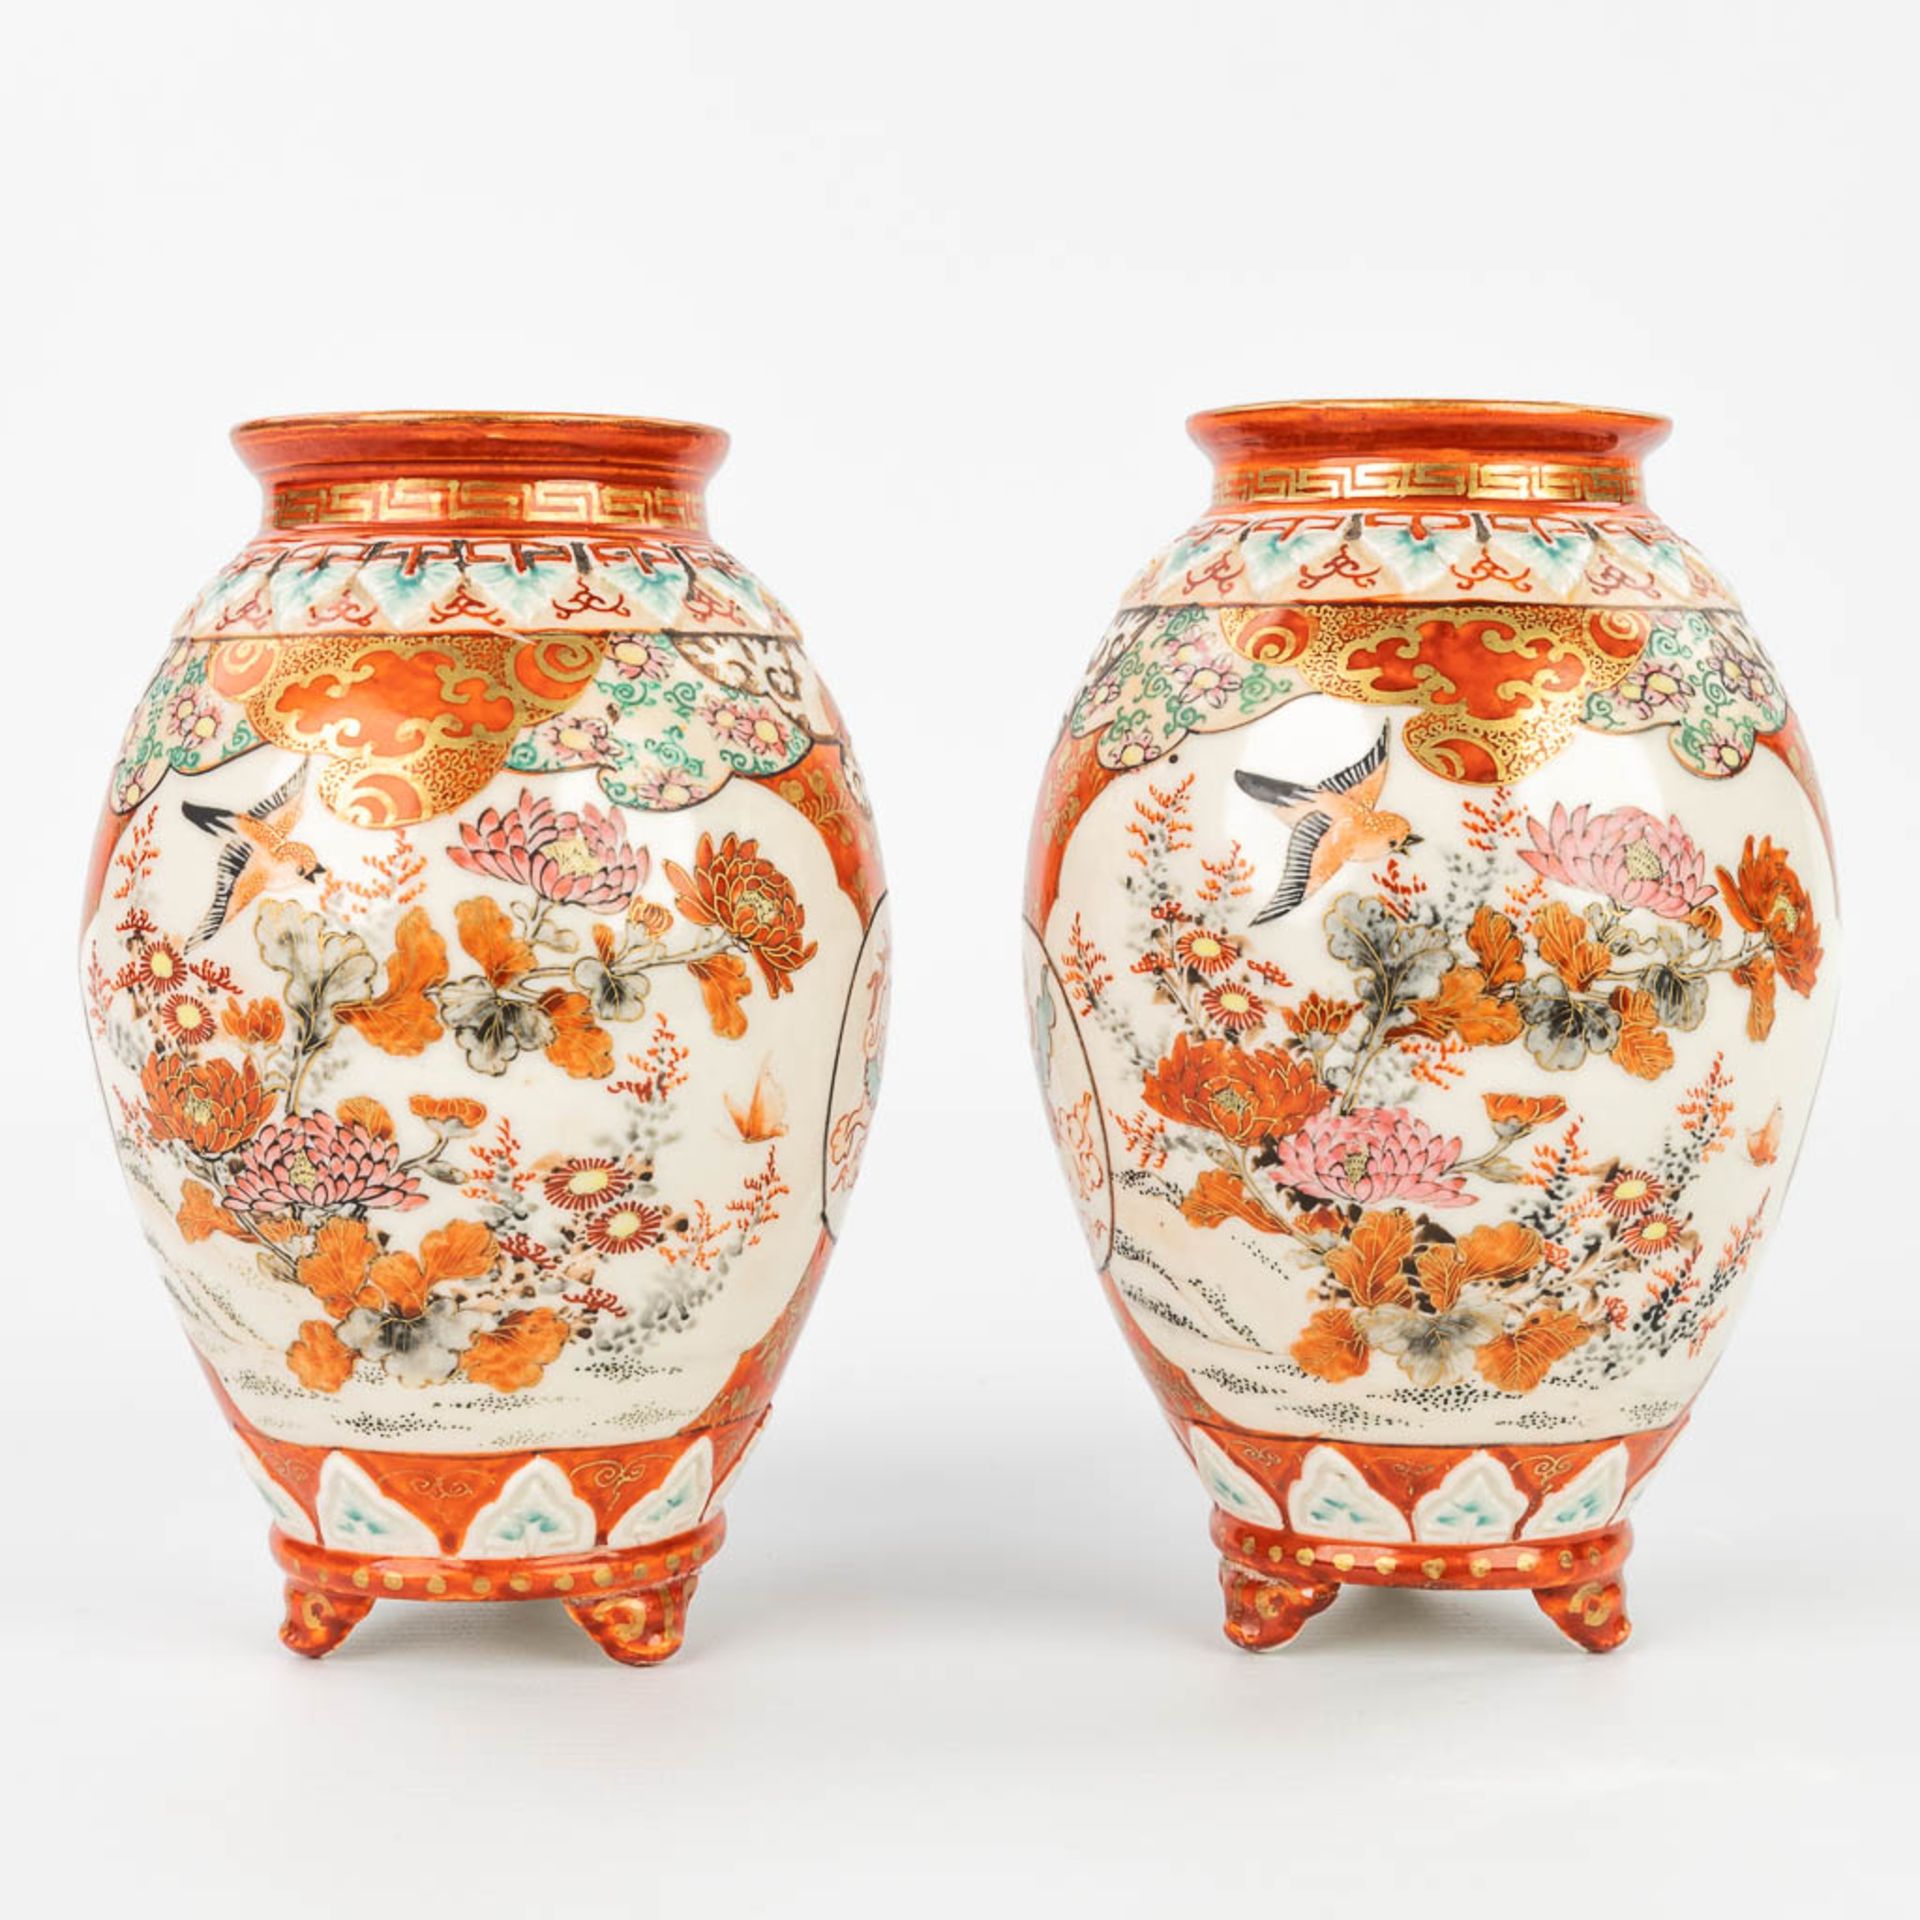 A pair of small vases made of stoneware with Kutani decor, made in Japan. (H:17cm) - Image 12 of 16